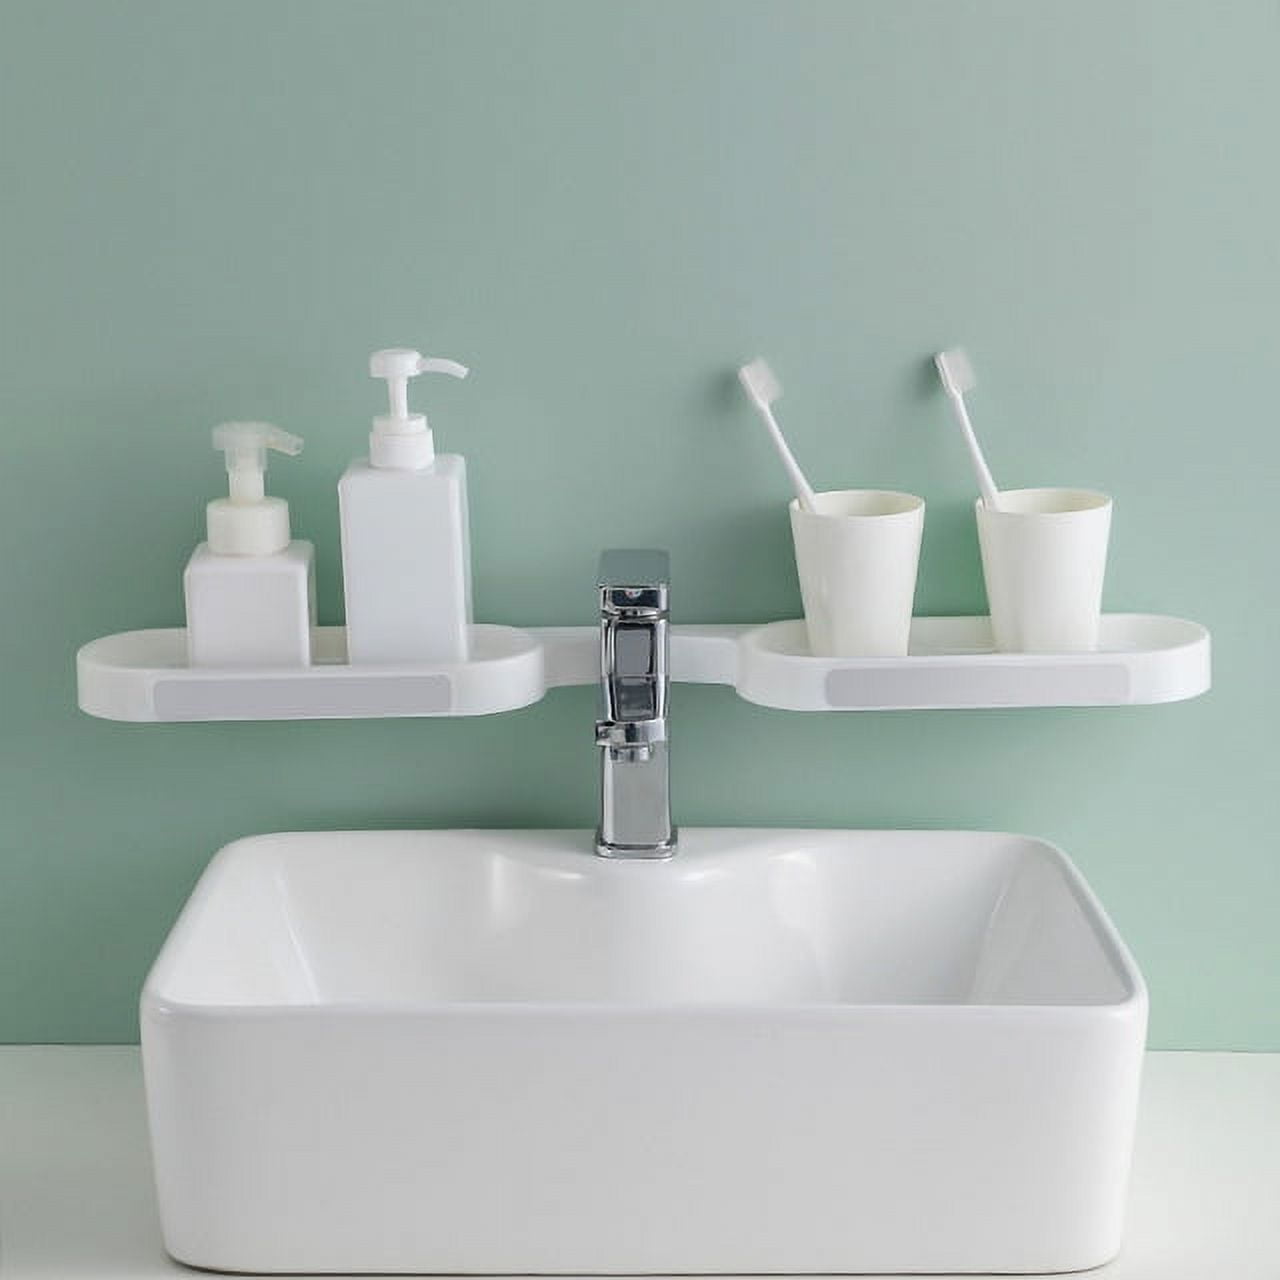 1pc Wall Mounted Bathroom Storage Rack With Suction Cup, No Drilling  Needed, For Toiletries And Accessories